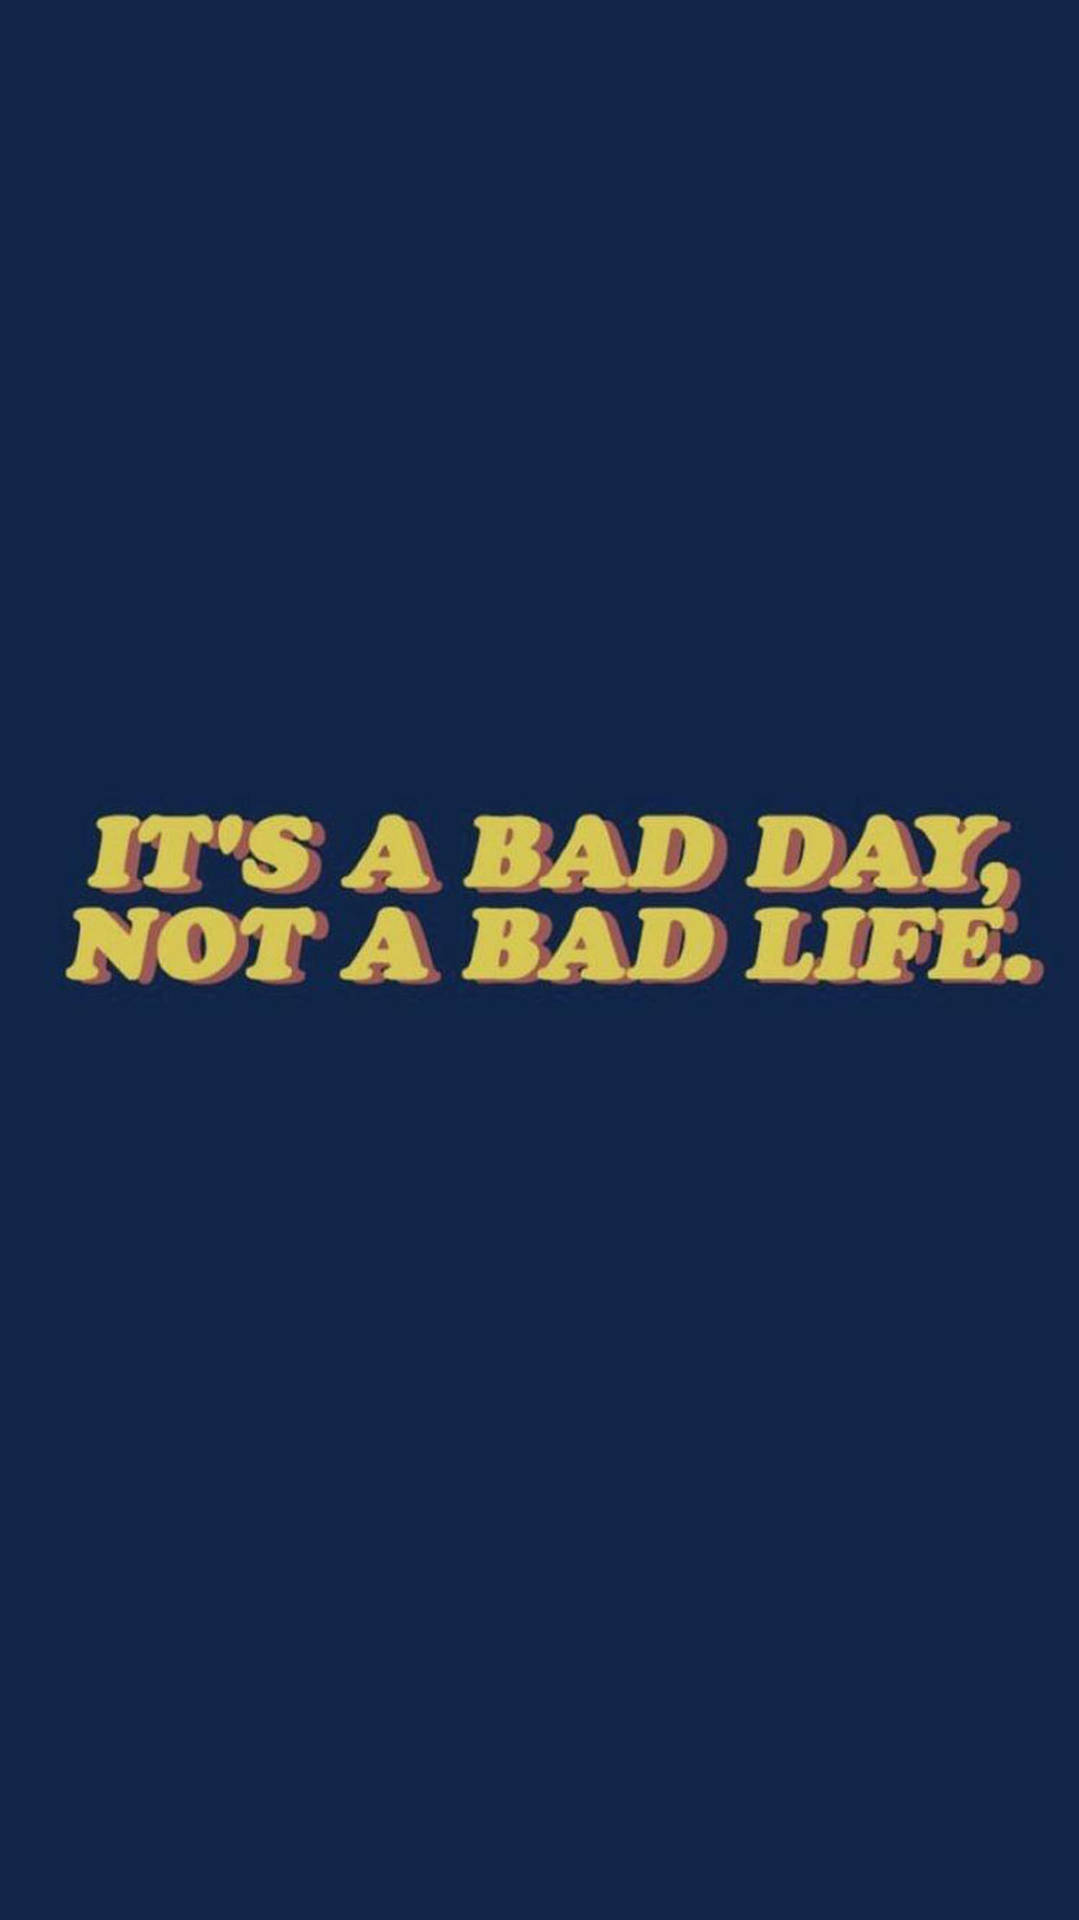 Download Aesthetic Boy Bad Day Wallpaper 